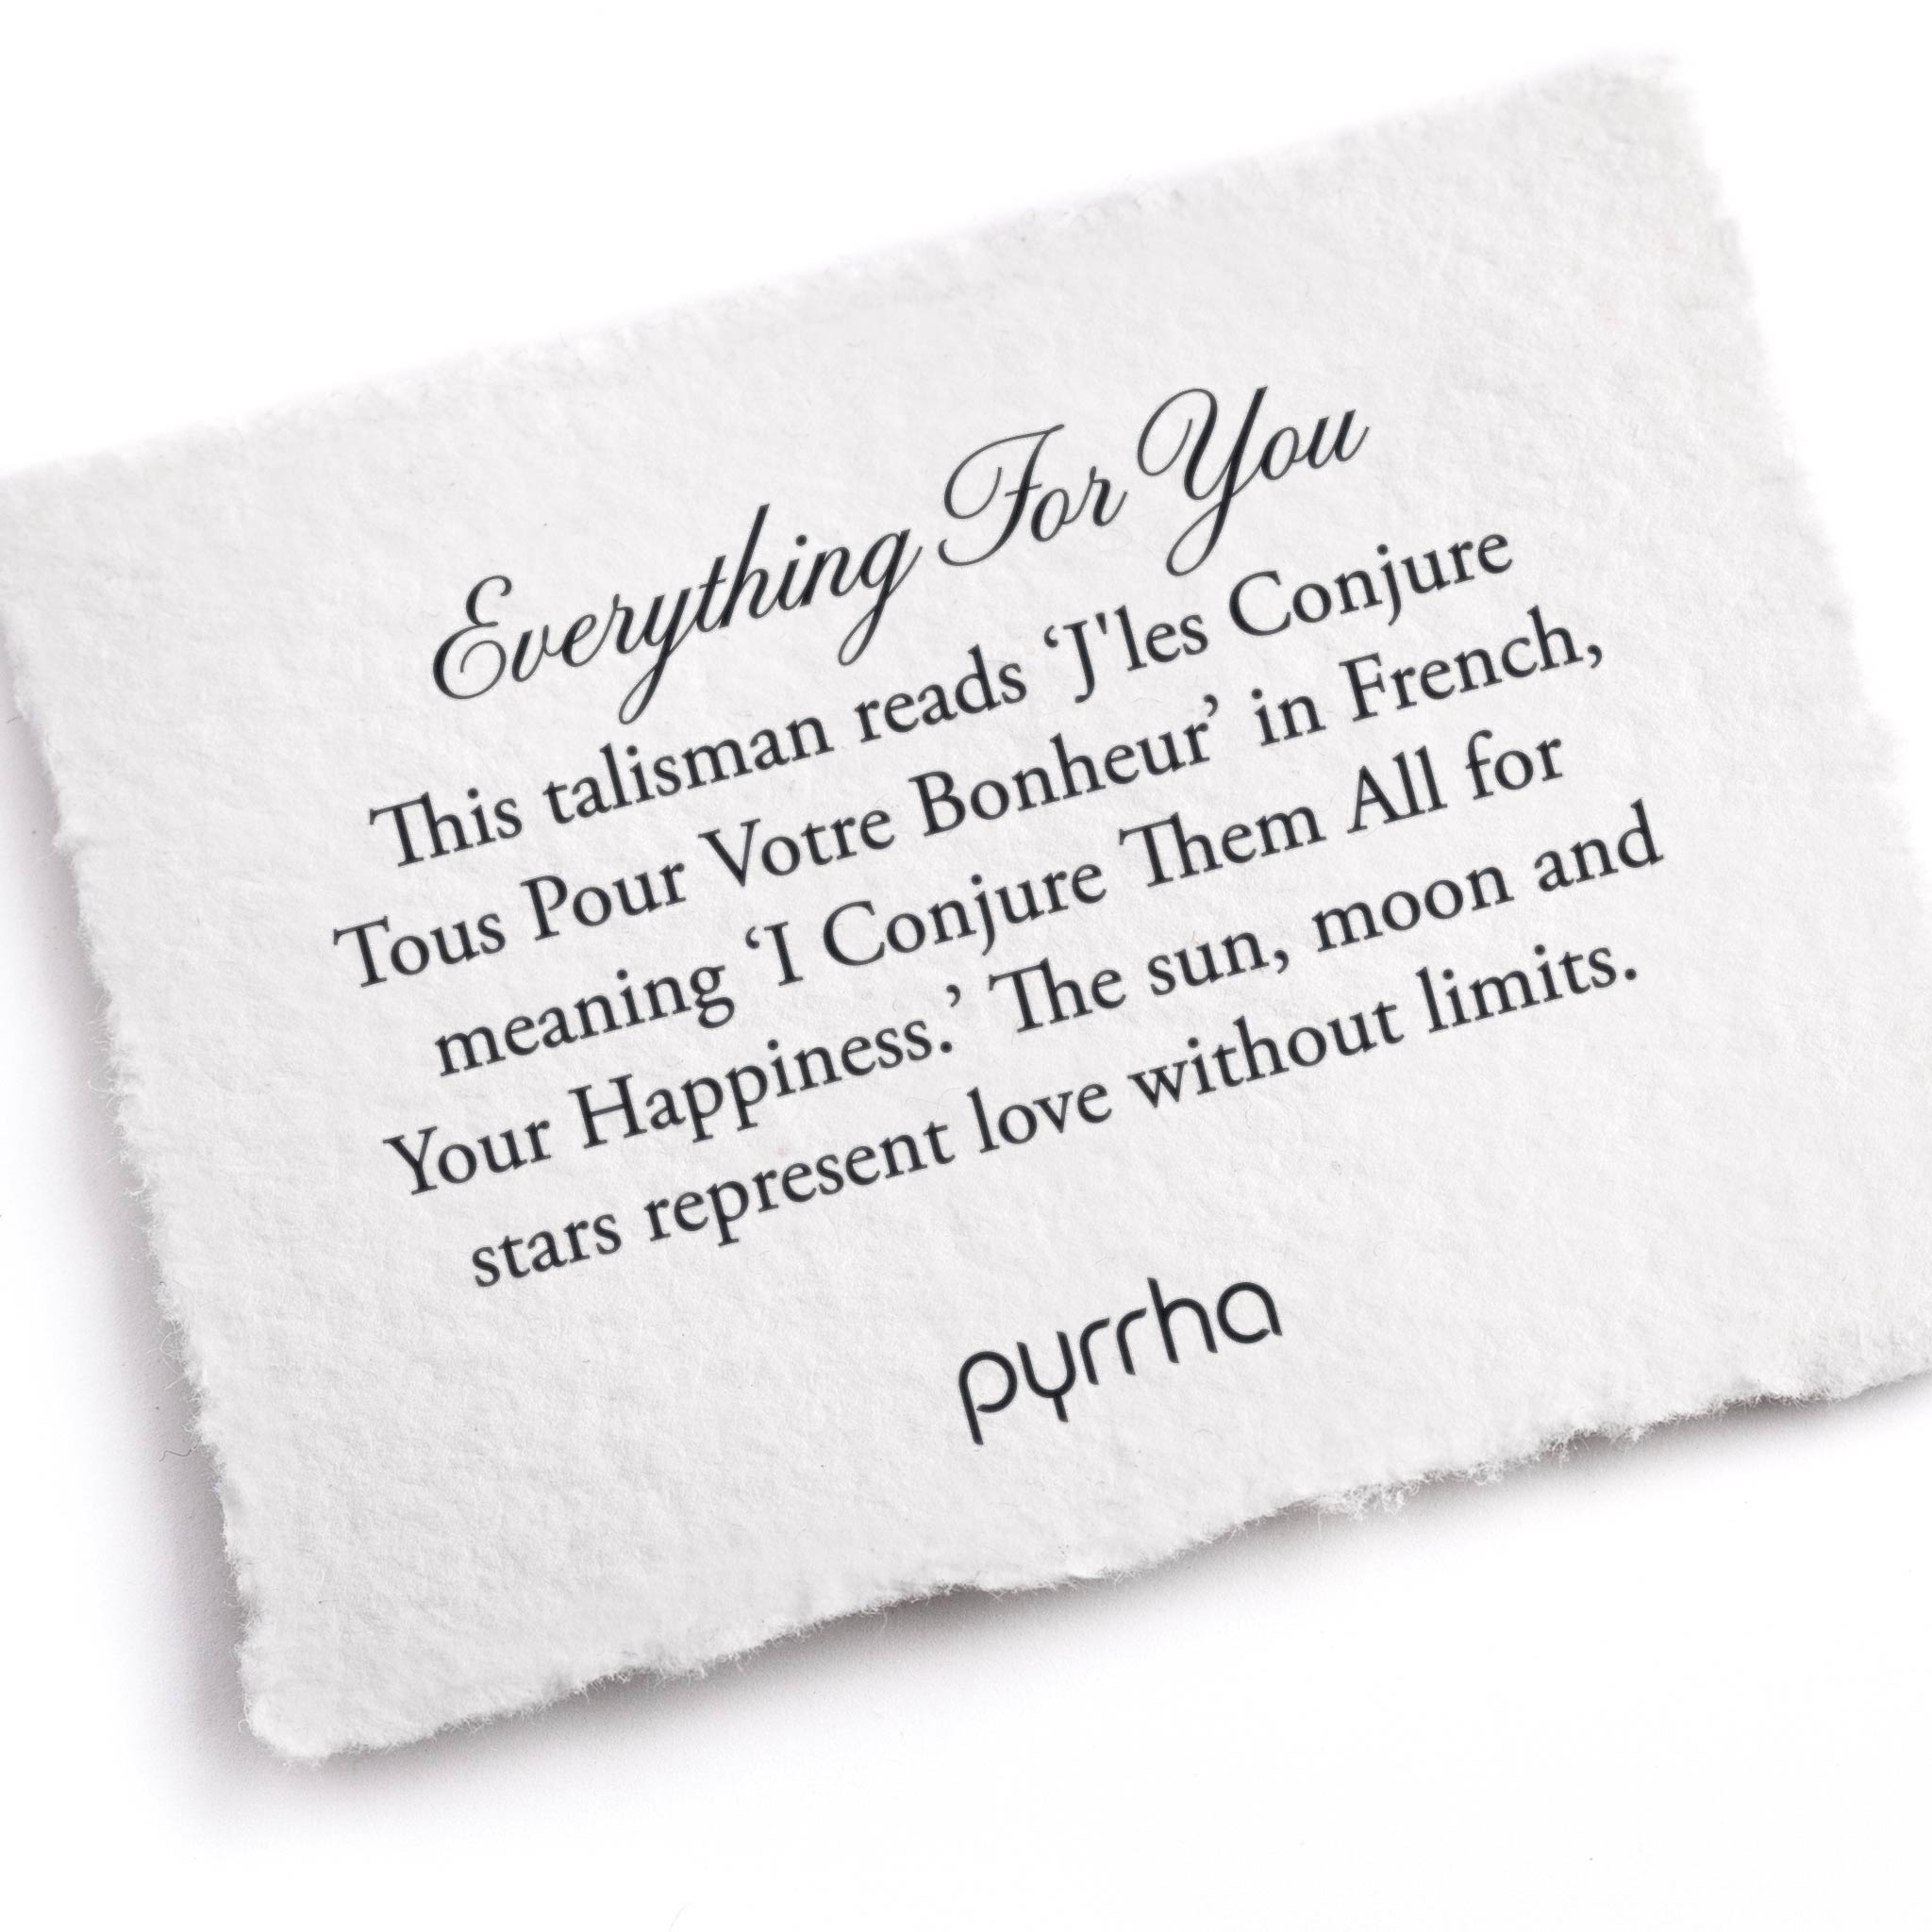 A hand-torn, letterpress printed card describing the meaning for Pyrrha's Everything For You Talisman Necklace